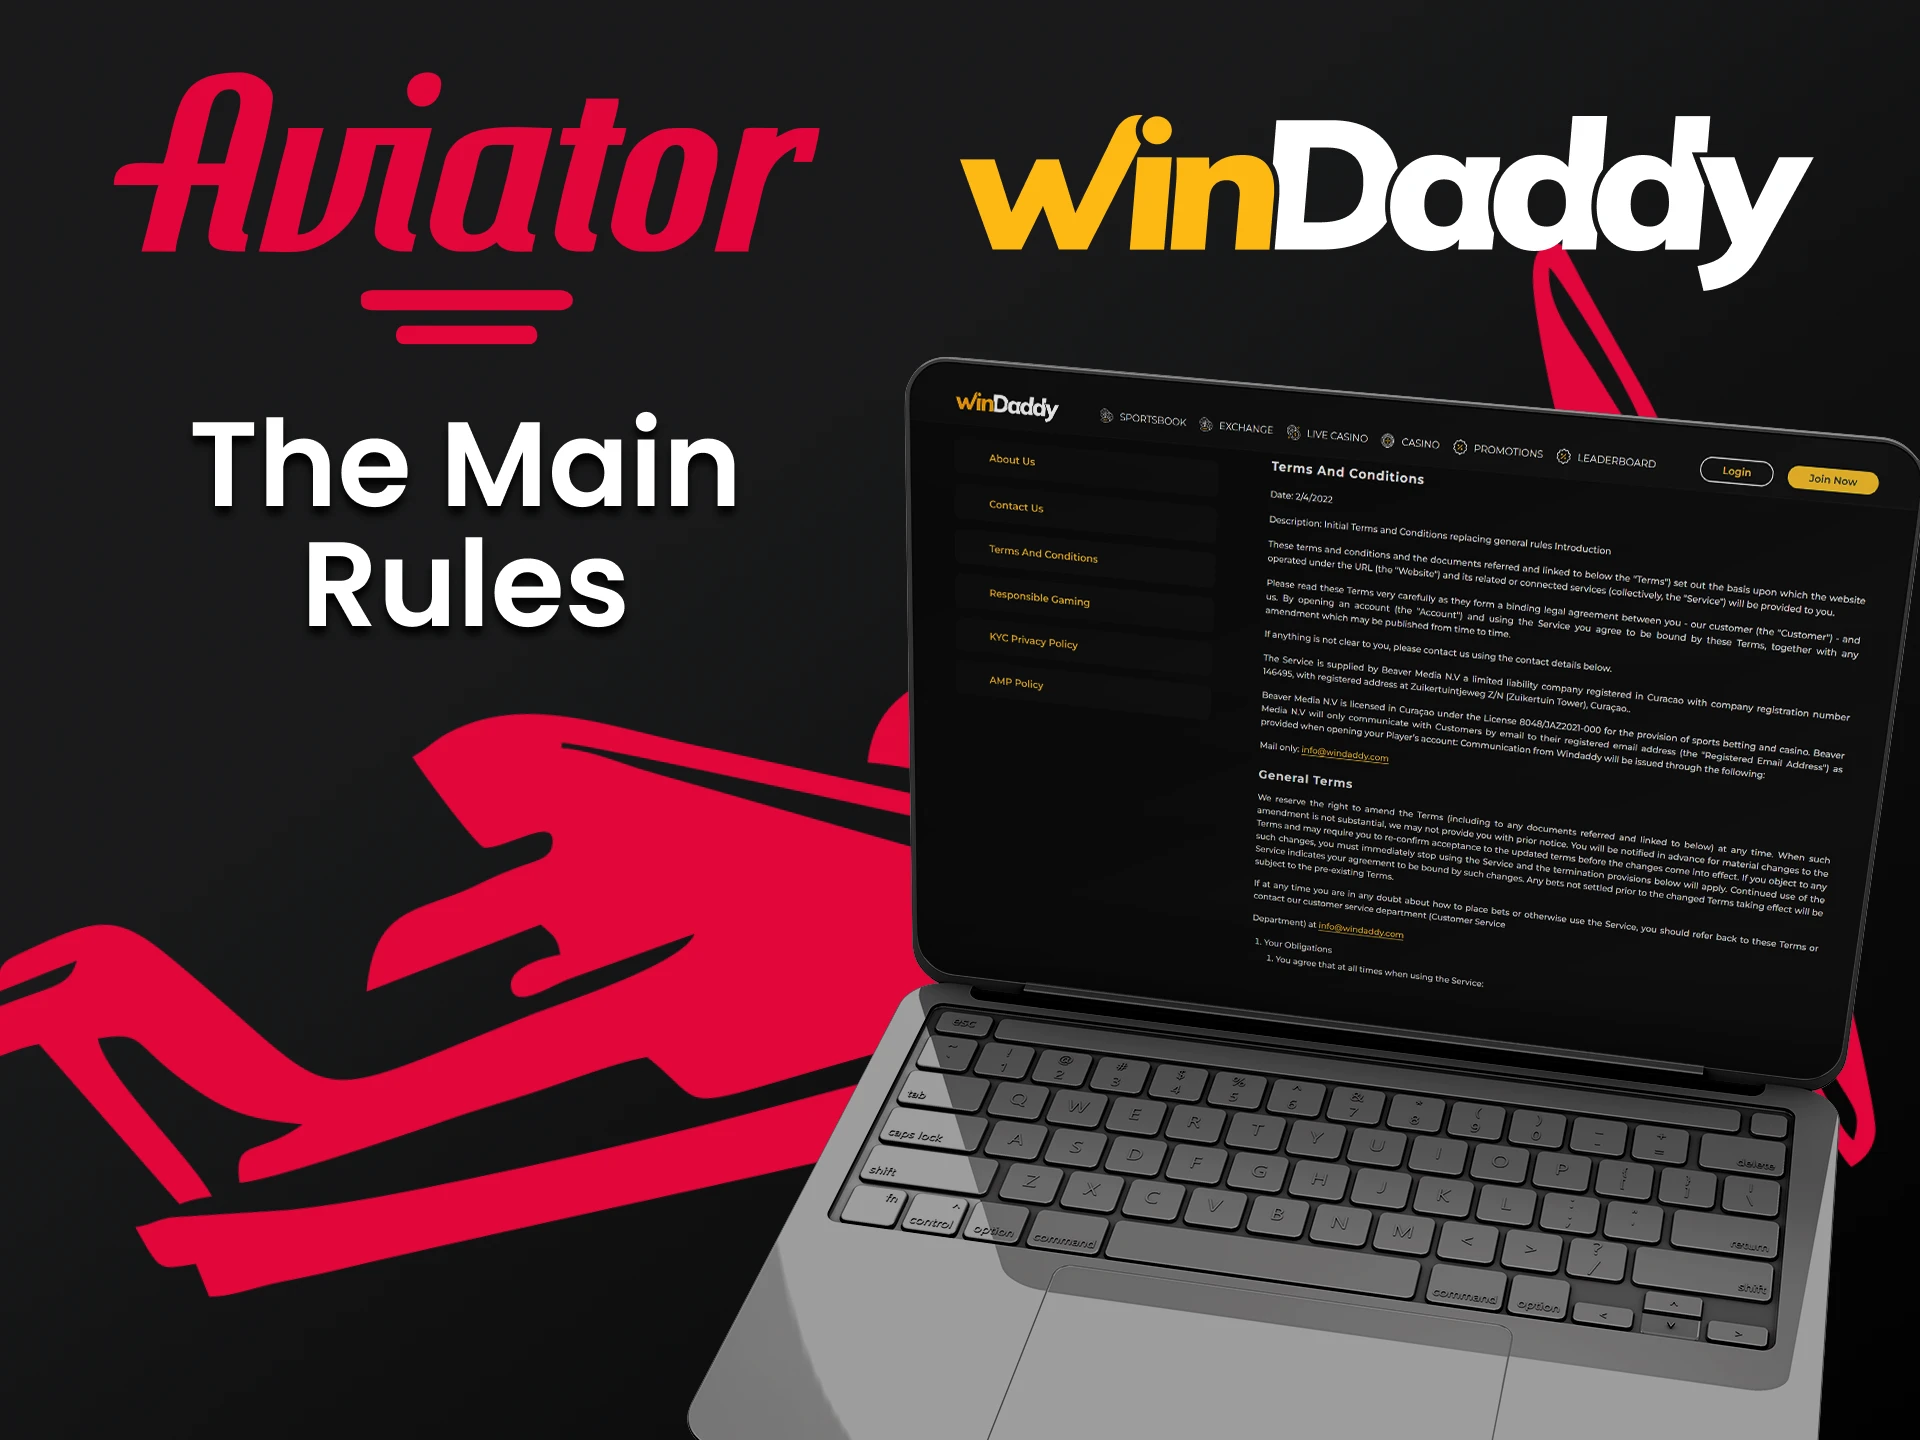 Learn about the rules of the WinDaddy site.